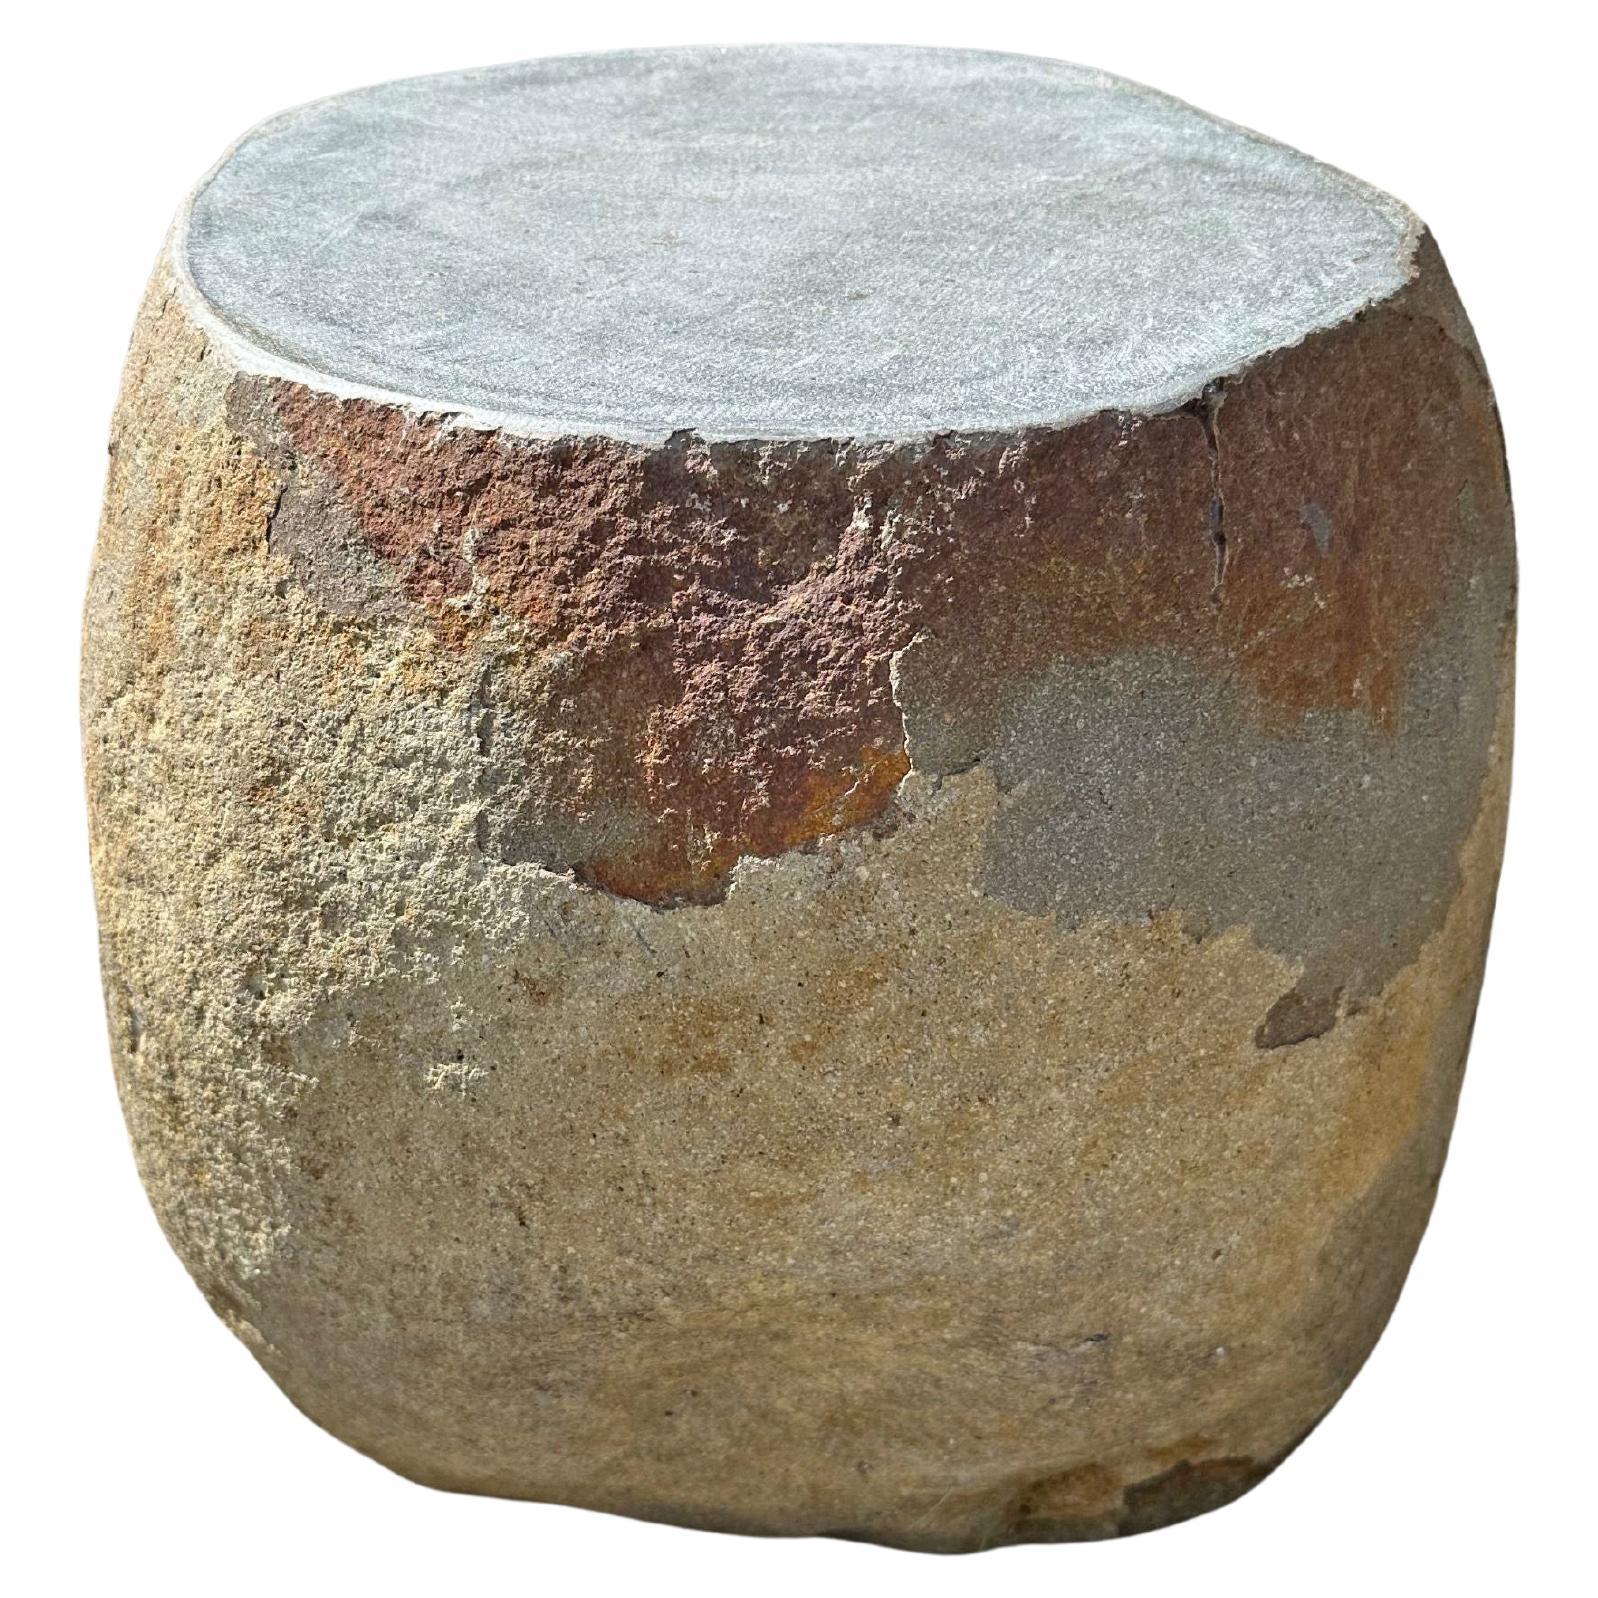 Solid Stone Side Table / Pedestal from Java, Indonesia